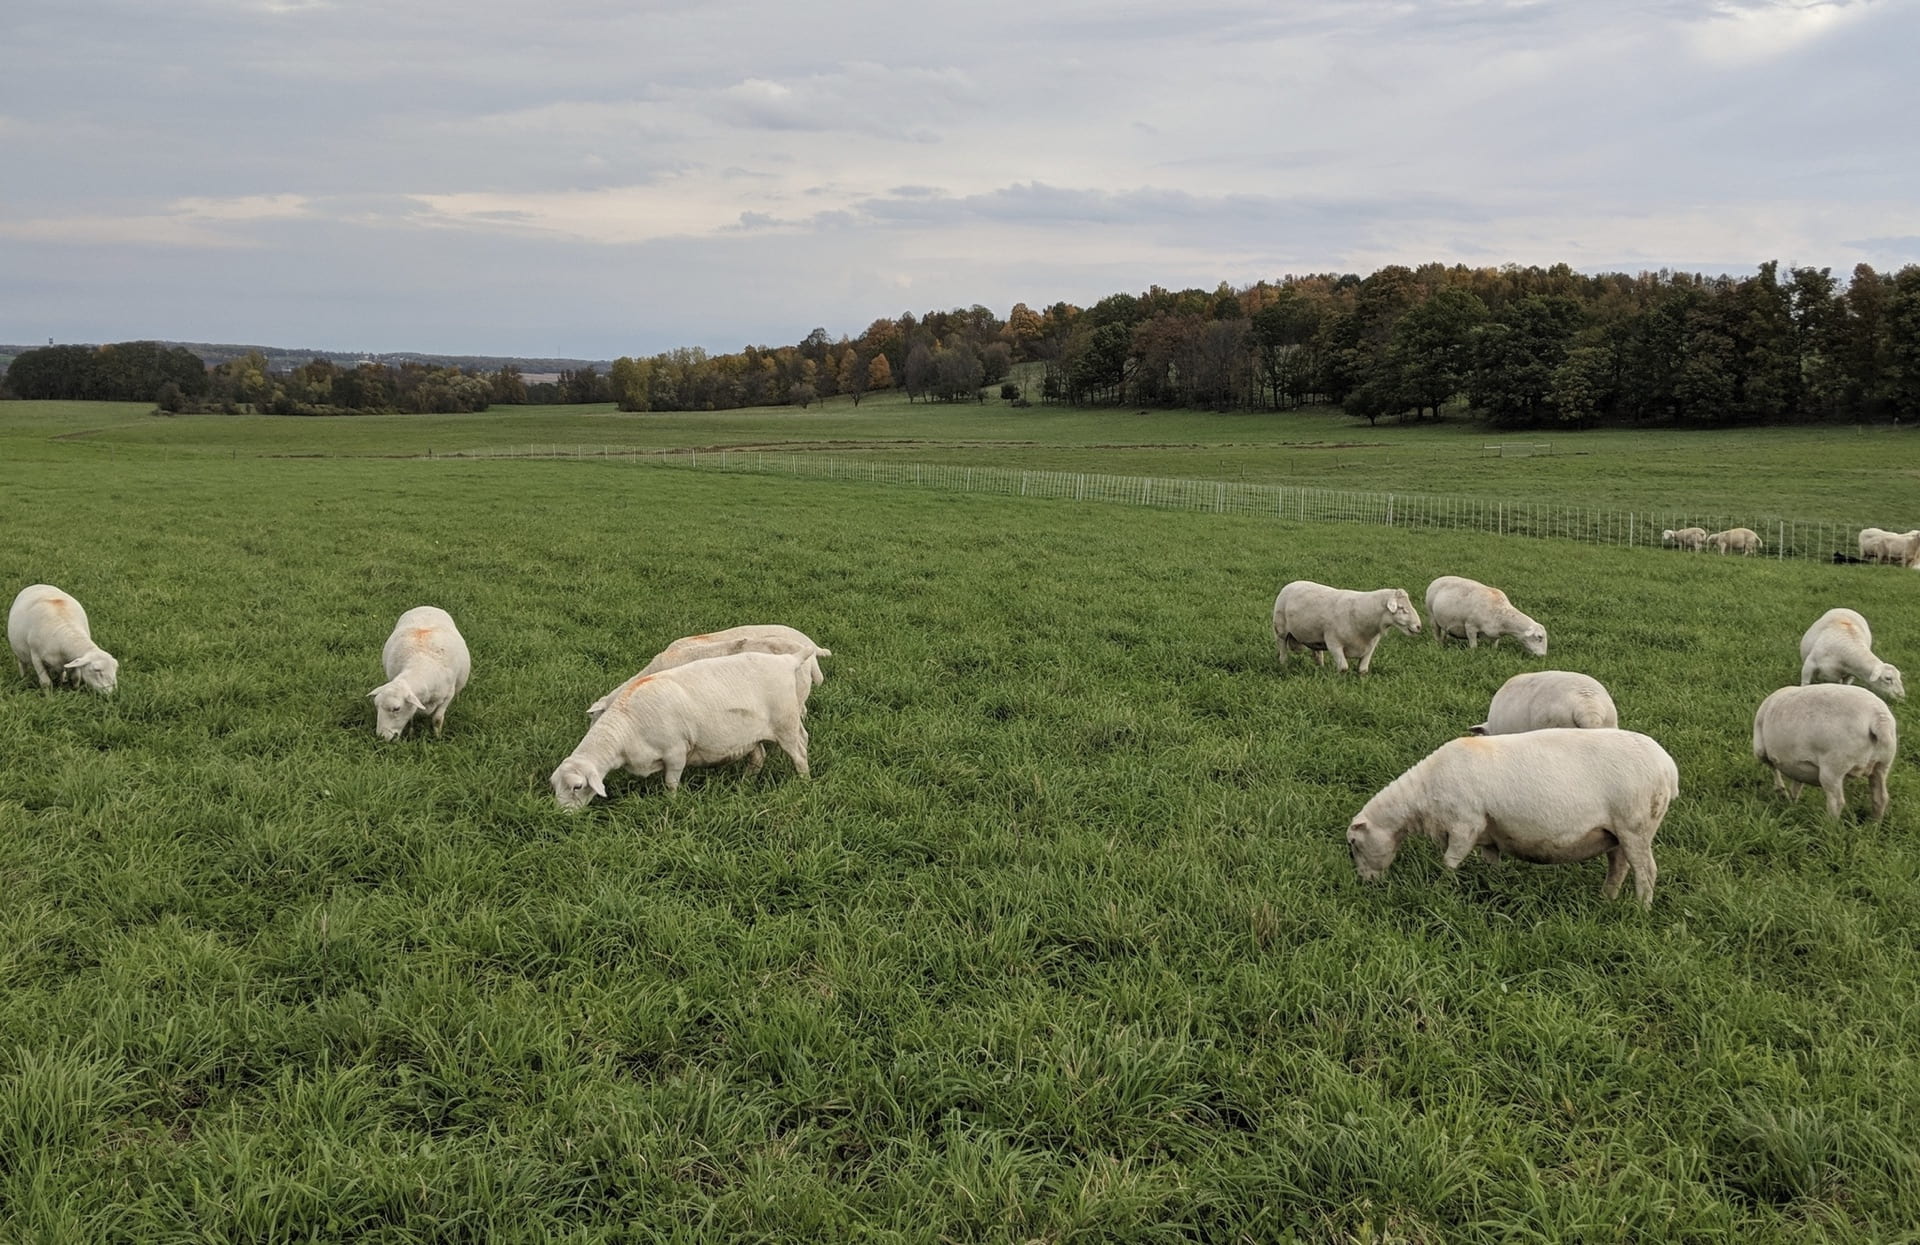 Several sheep grazing in a field.